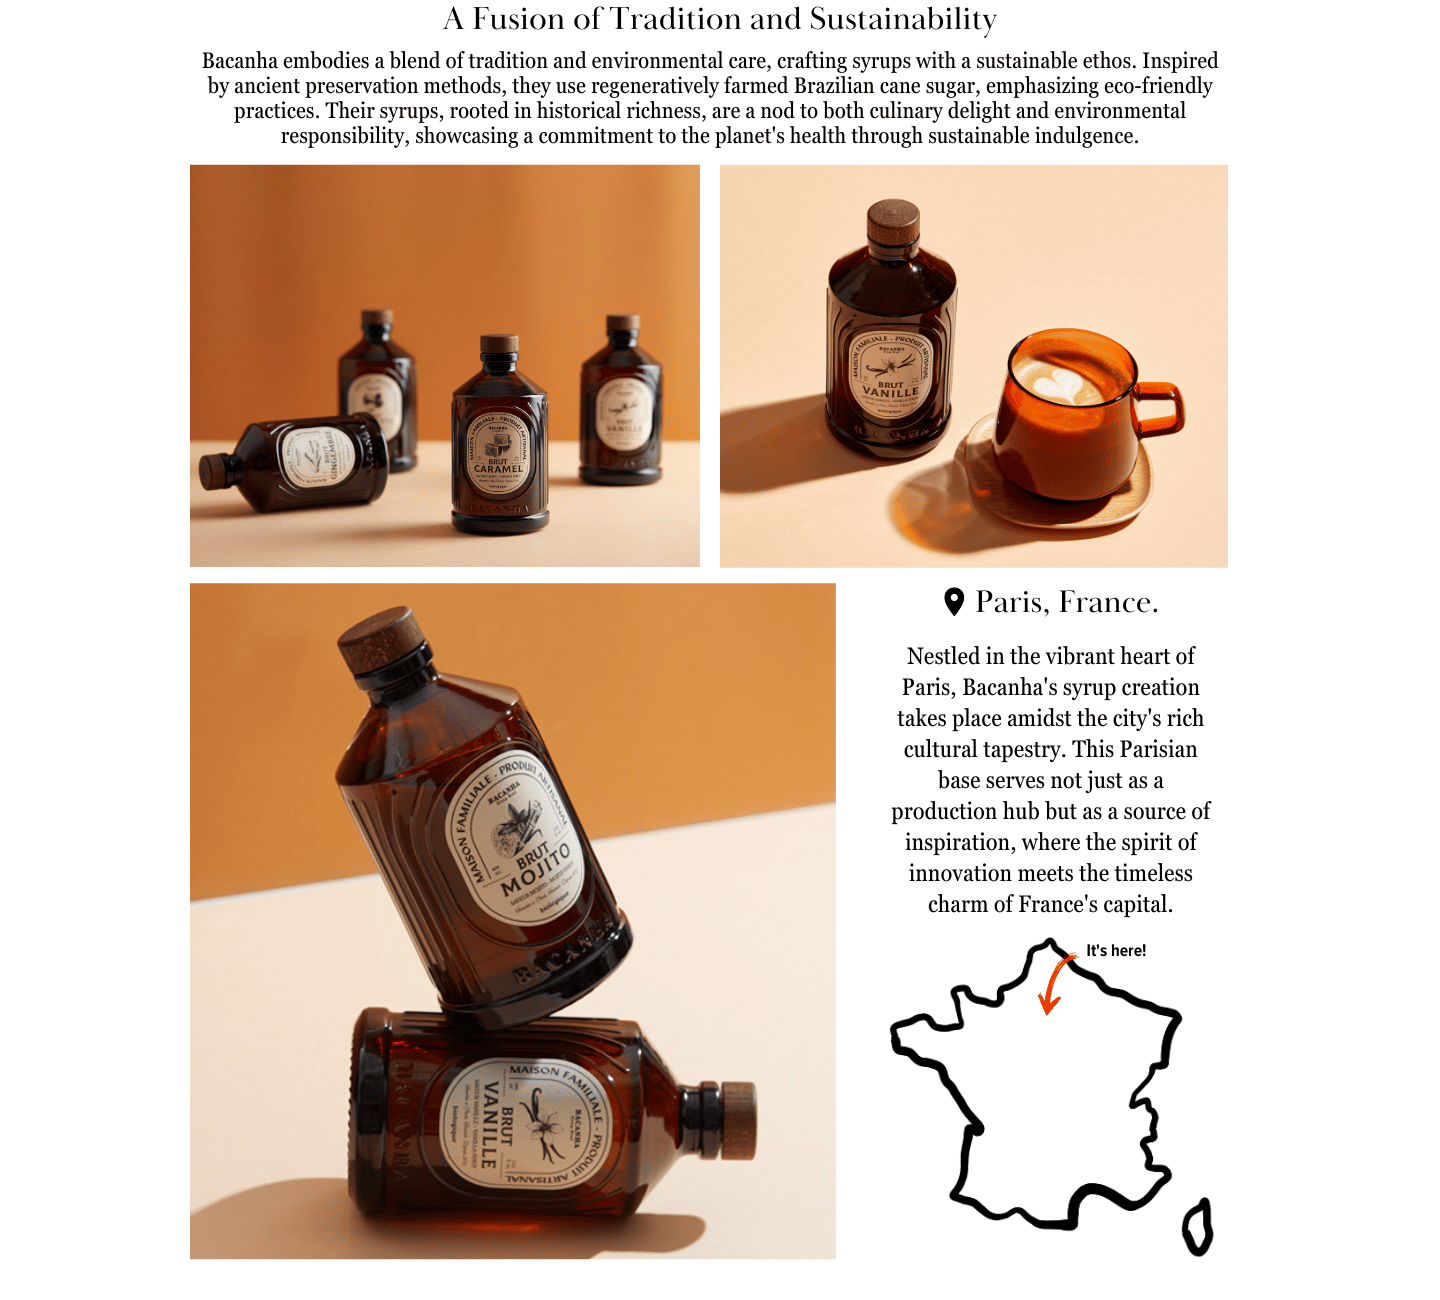 The image depicts a promotional presentation for "Bacanha," a brand that produces syrups. The image is segmented into three parts, each featuring different syrup bottles against an orange backdrop. Each part of the image highlights a variety of syrup flavors, such as "Vanille," "Caramel," and "Brut Mojito," among others. The description emphasizes Bacanha's commitment to tradition and sustainability, crafting syrups from regeneratively farmed Brazilian cane sugar. Additionally, it notes that the syrup creation is based in Paris, France, positioned as both a production hub and a source of inspiration within the city’s rich cultural landscape. The design is neat, with a modern aesthetic that supports the brand's message of sustainable luxury.